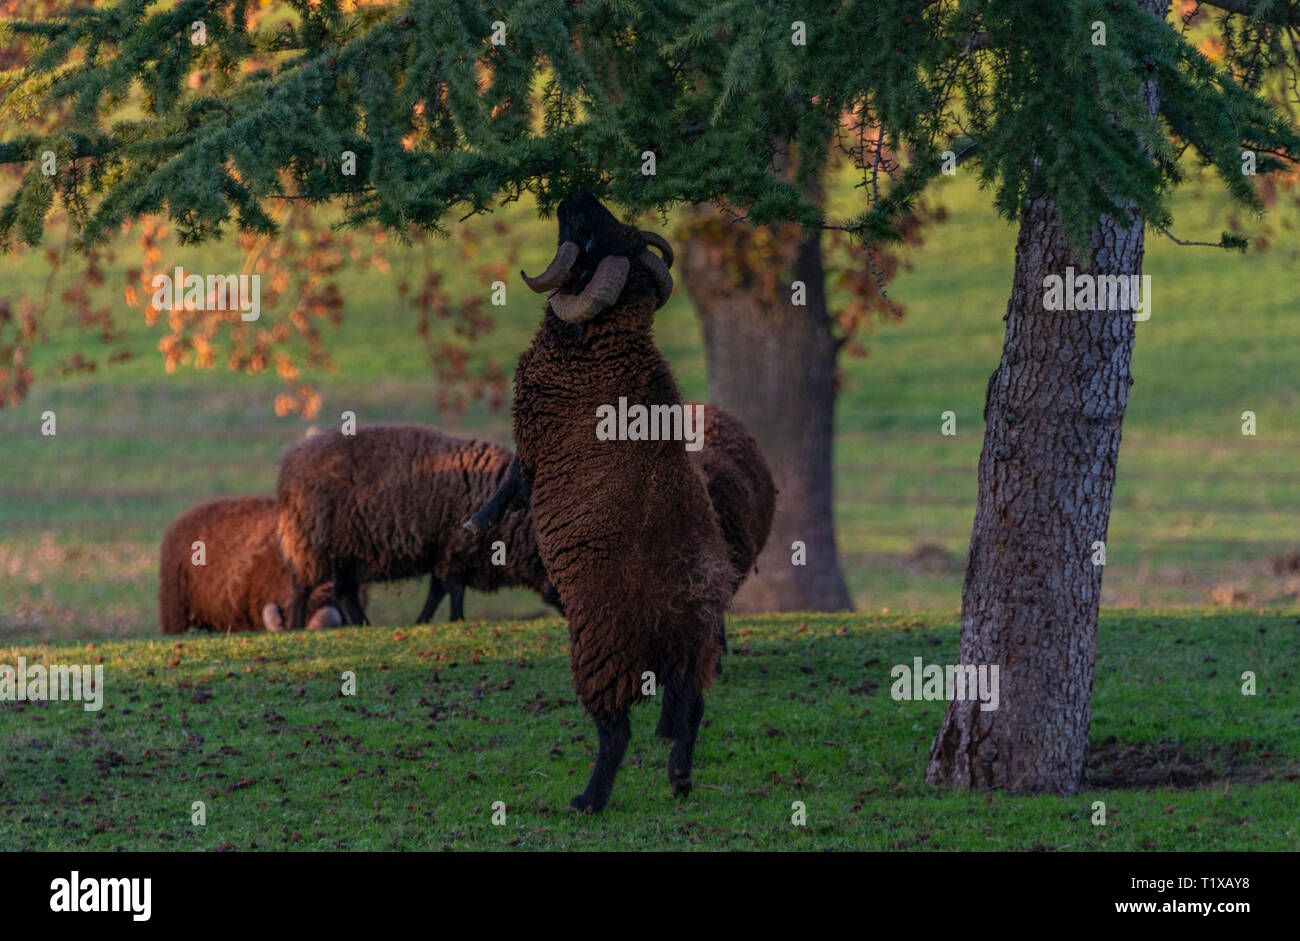 Black, horned Hebridean Ram standing on hind legs eating foliage off a tree. Stock Photo